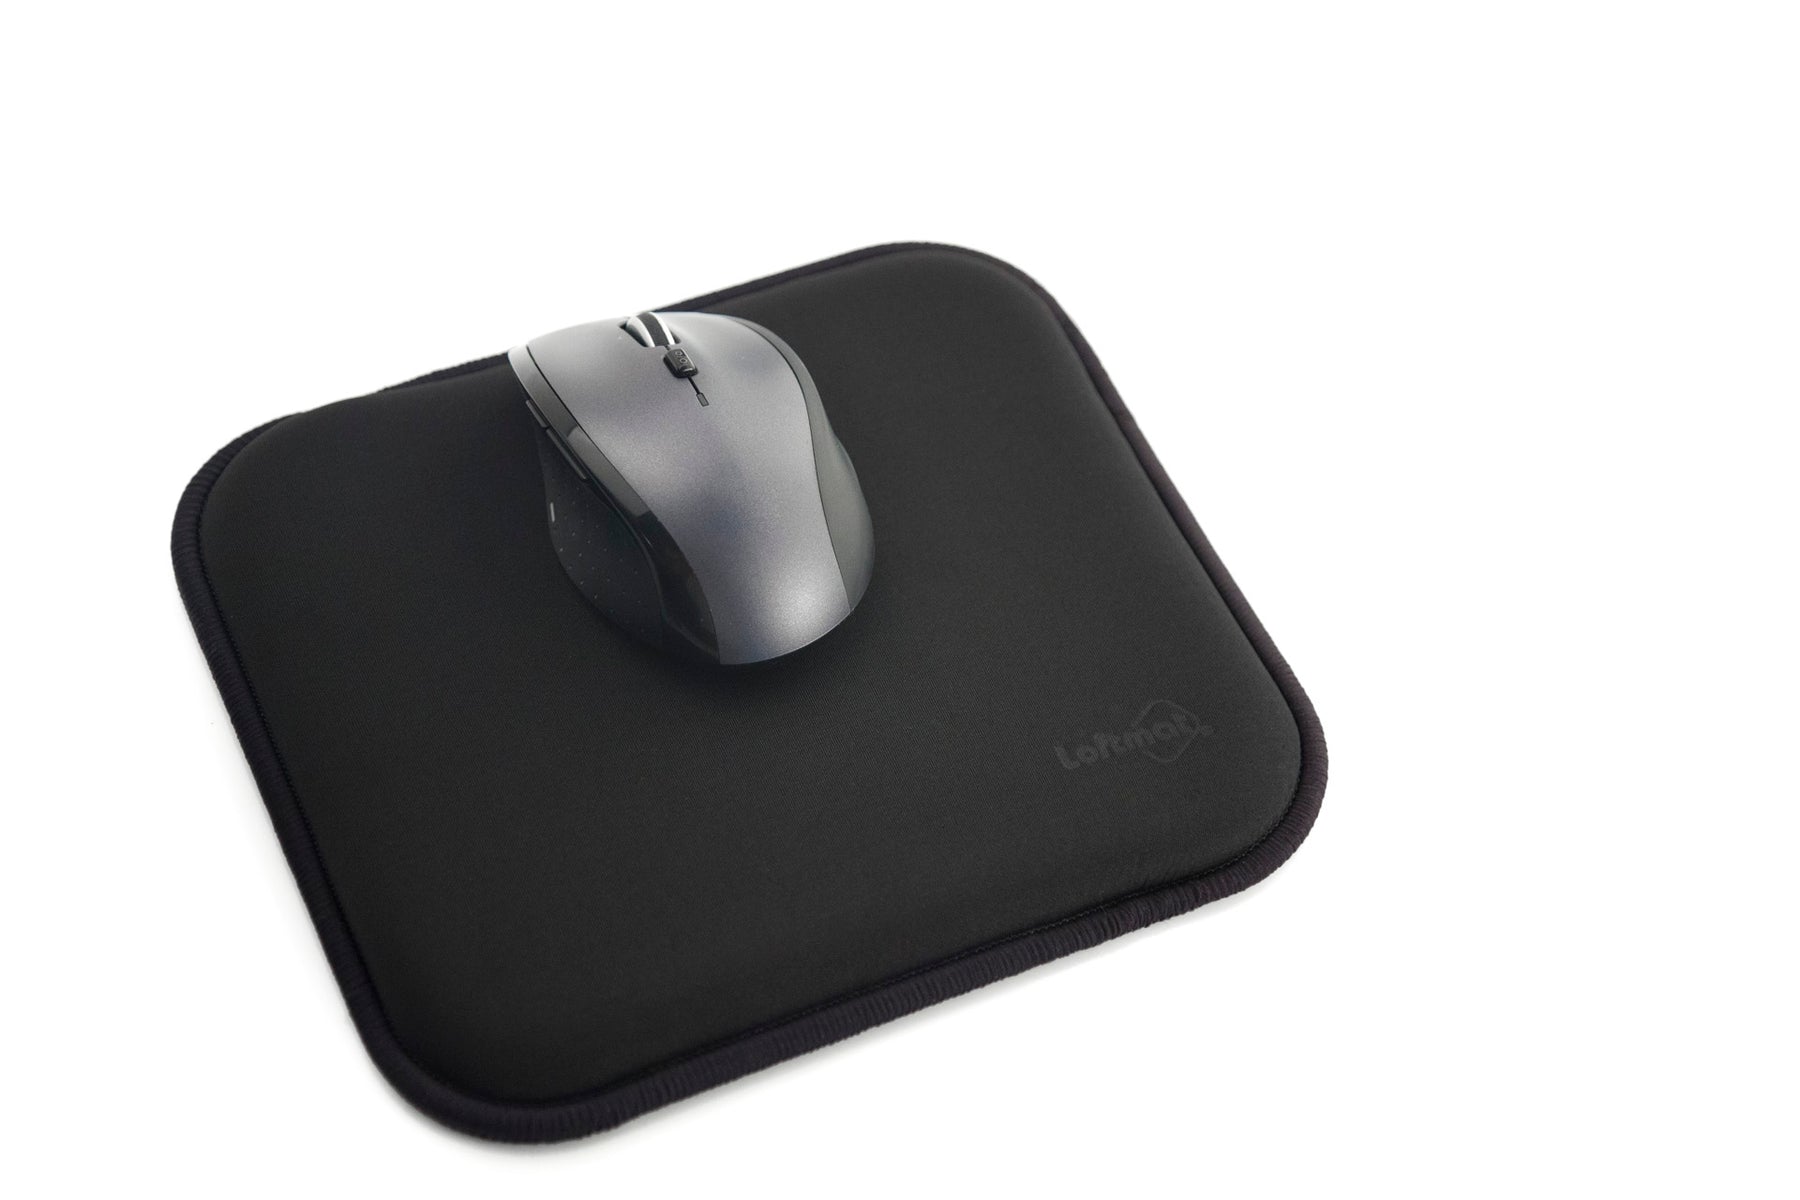 LOFTMAT (8x9 inch) Cushioned Mouse Pad - "The Office Small" - Black Color